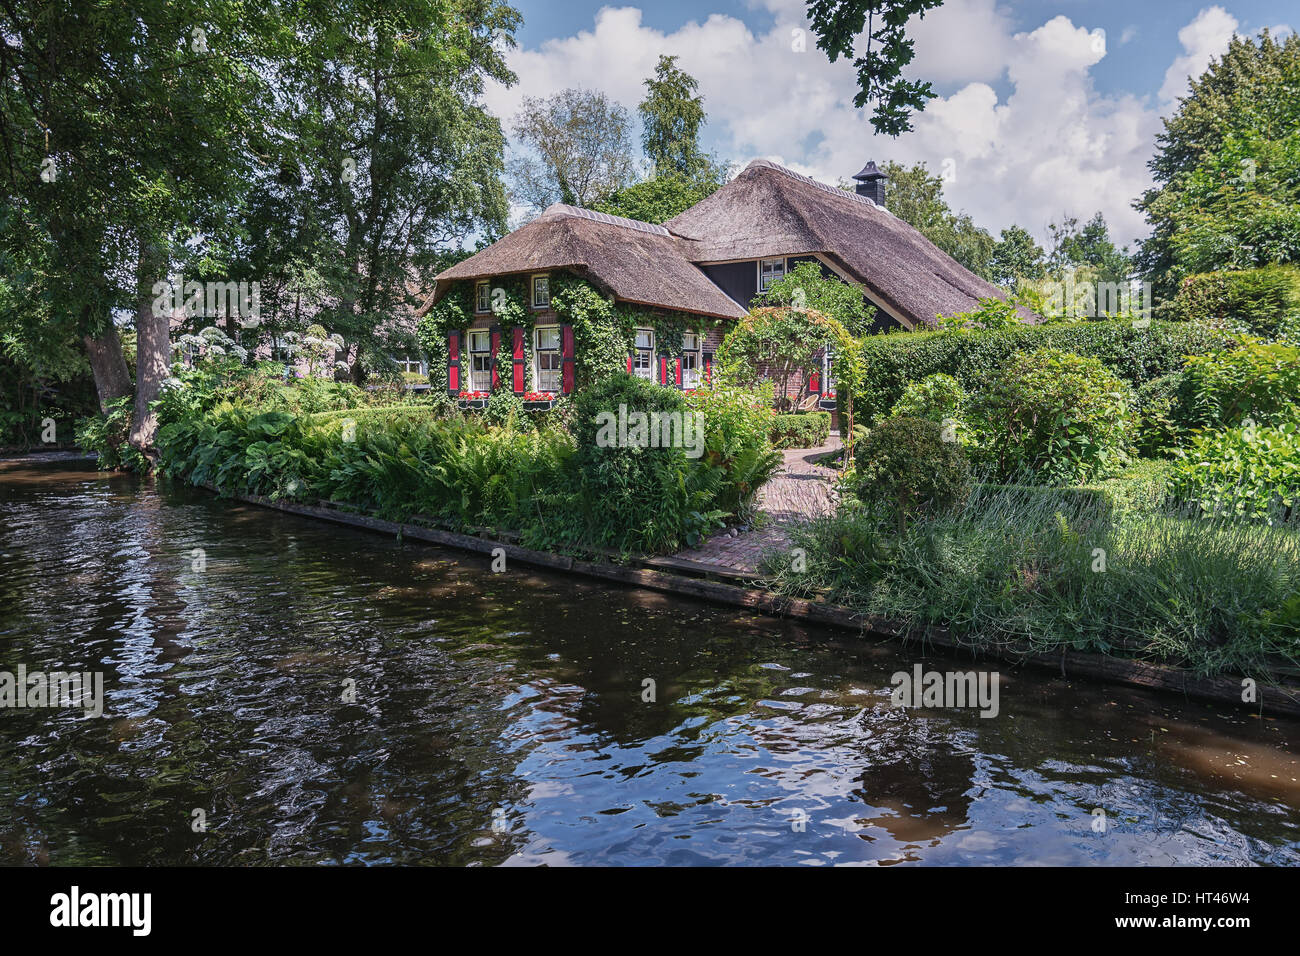 Giethoorn, Netherlands – June 29, 2016:  View of a blooming garden in front of the house of the Dutch town Giethoorn. Stock Photo